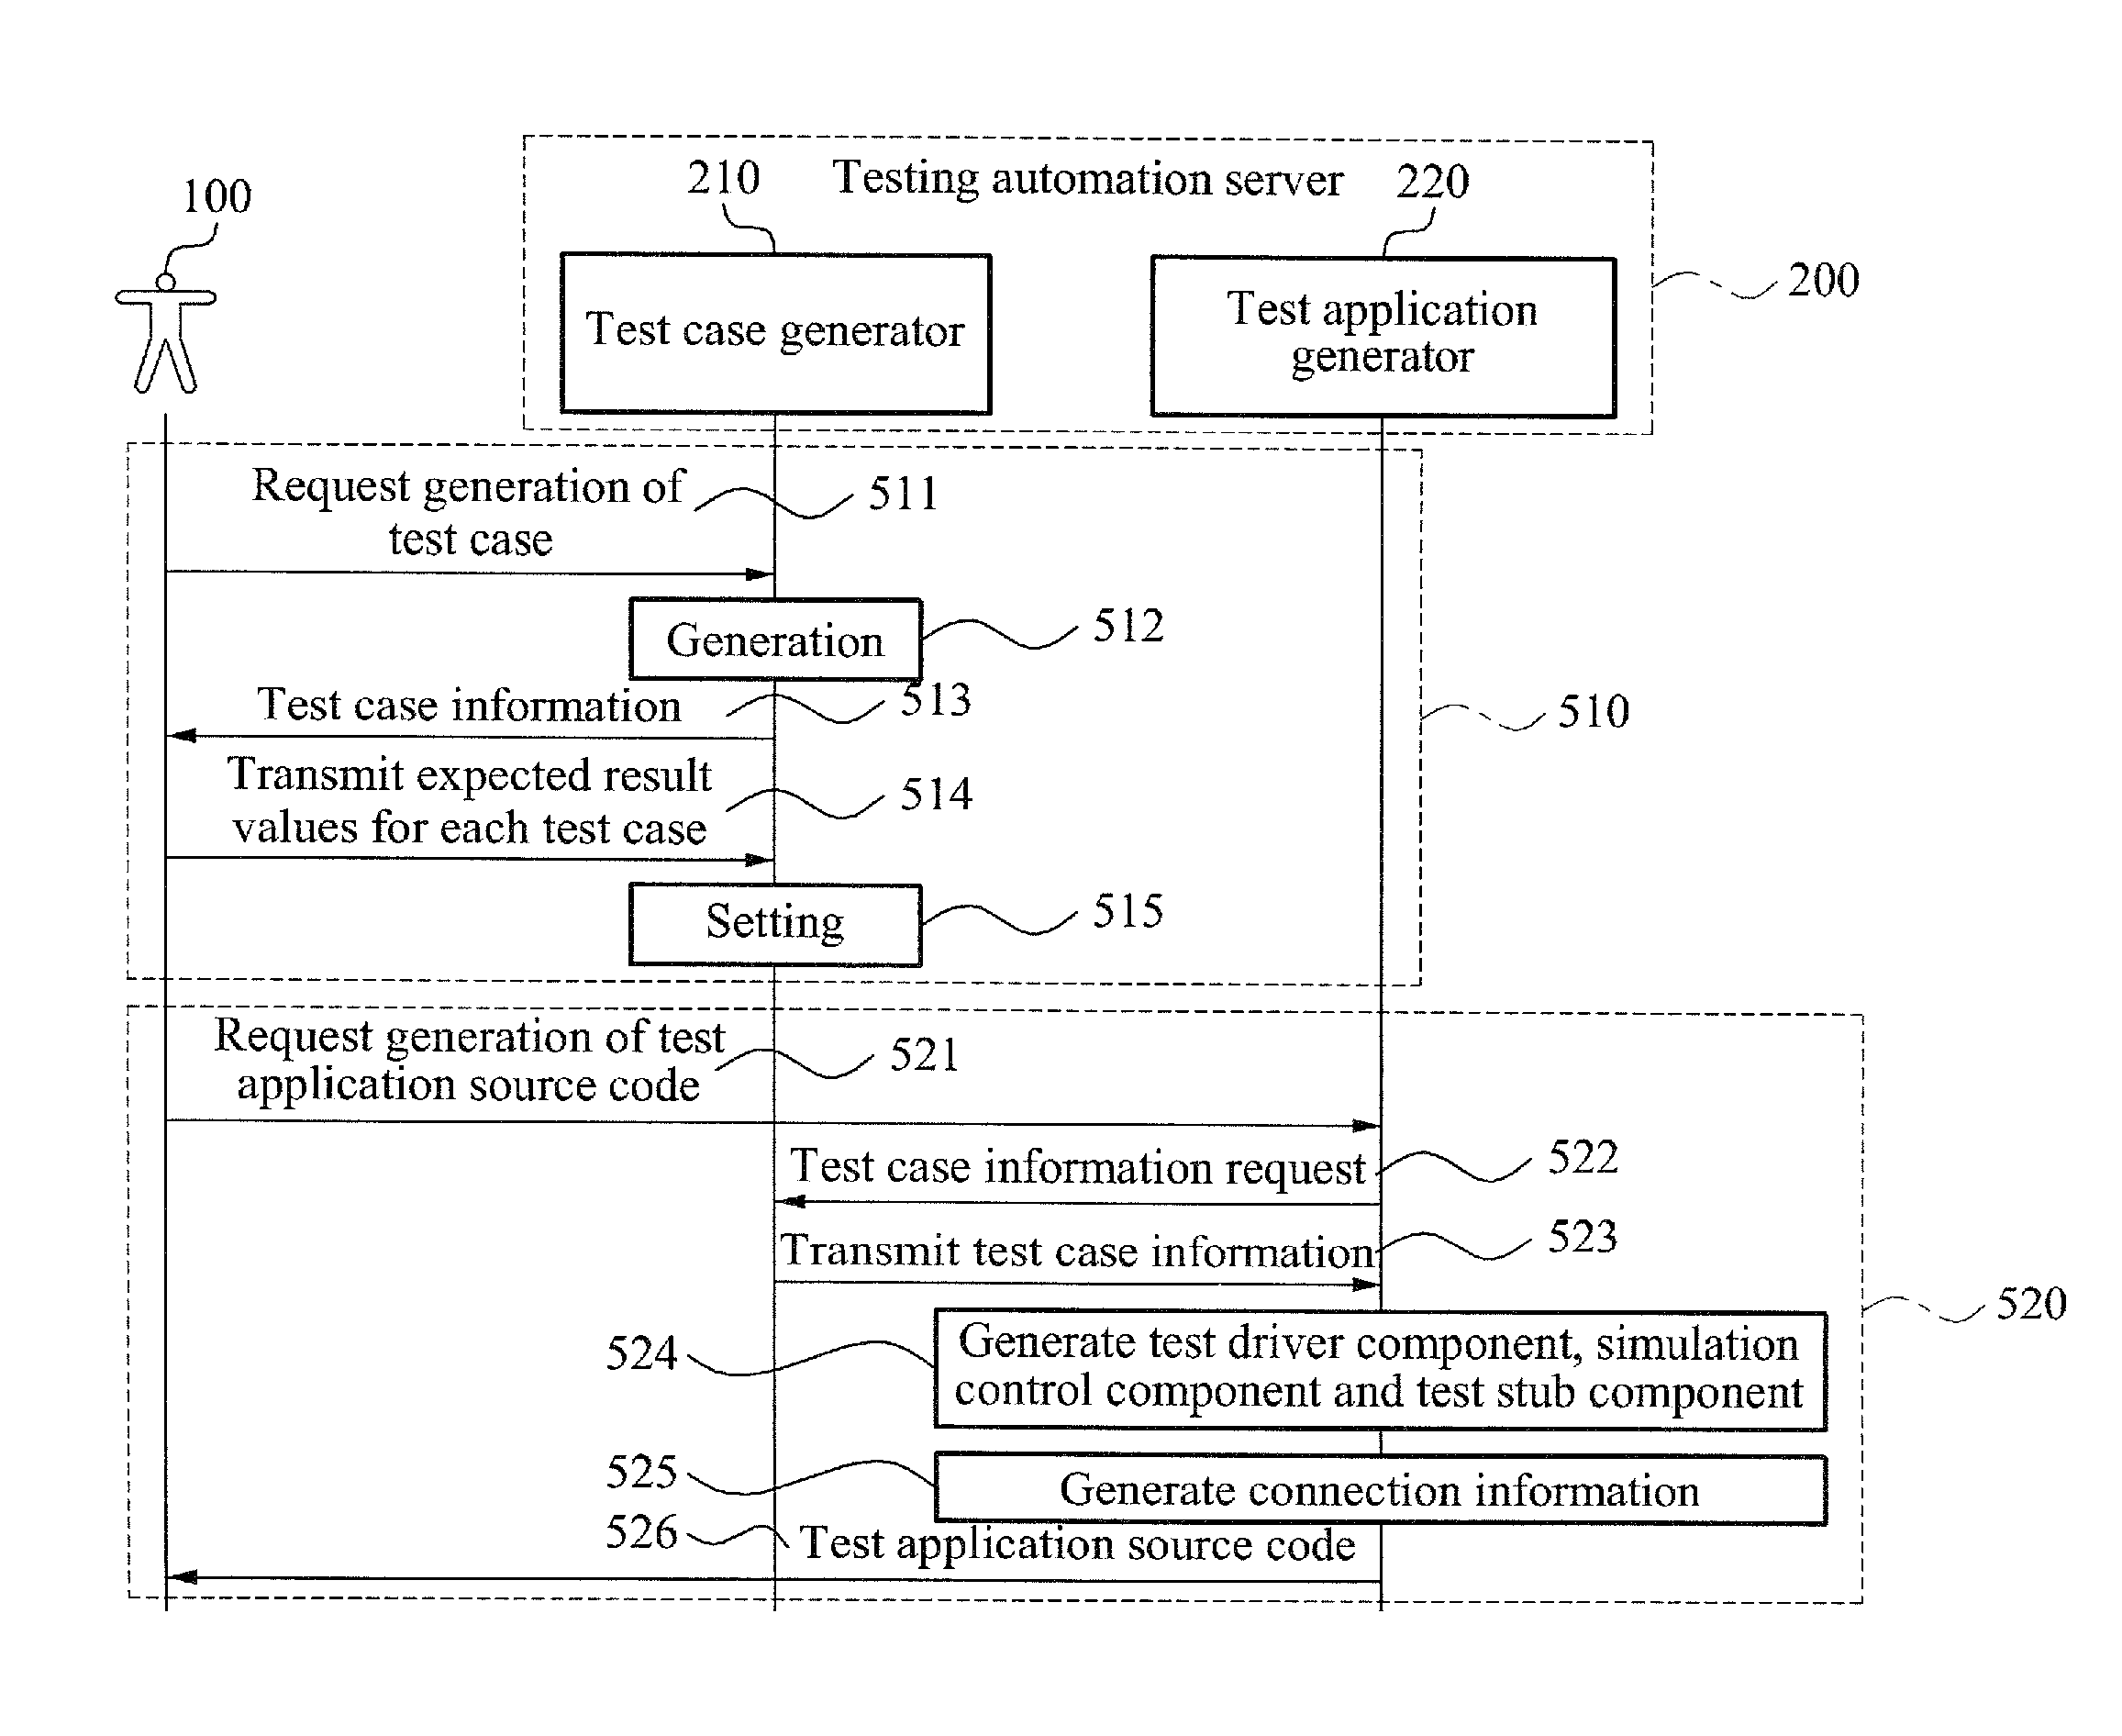 Simulation-based interface testing automation system and method for robot software components